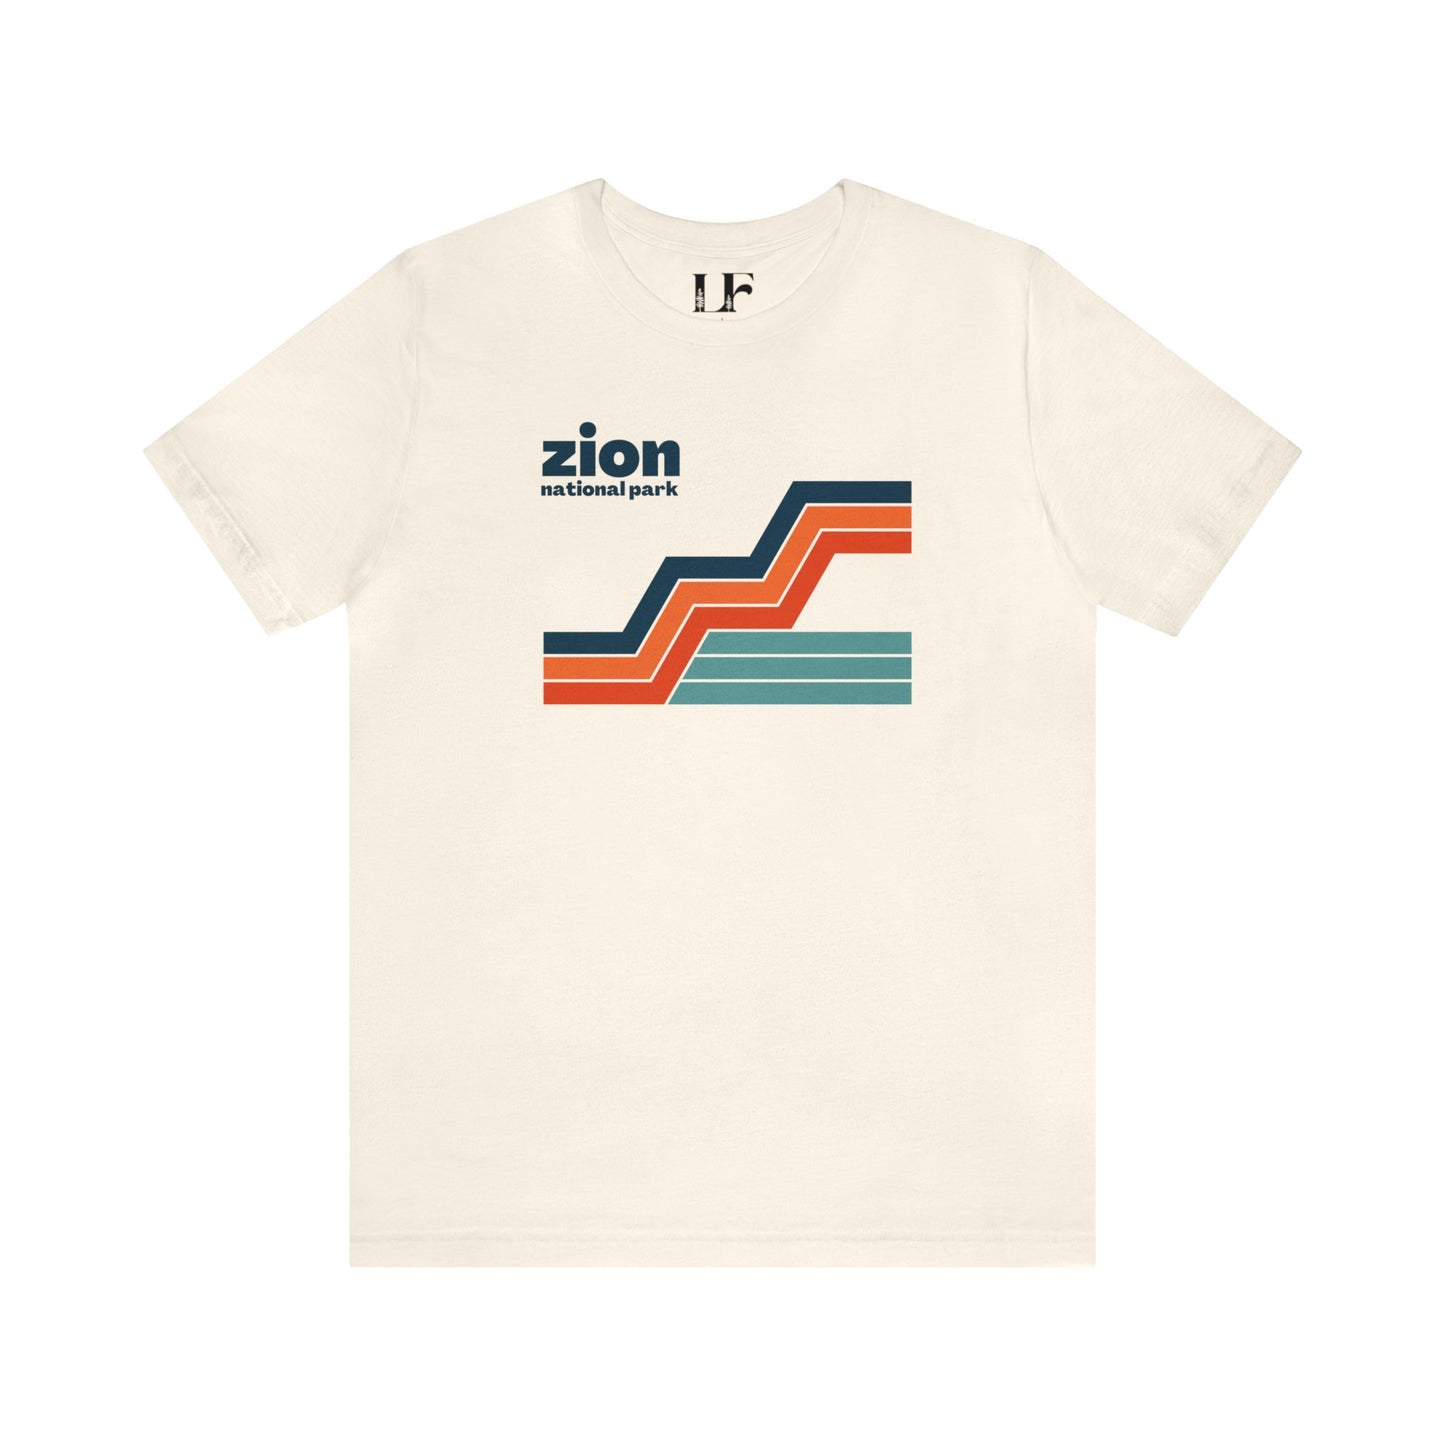 Retro Zion National Park ShirtBring back the vibe on your next outdoor adventure with these seventies retro styled national park tees.
- 100% cotton - light weight fabric
Mustard Only:
- 100% cot